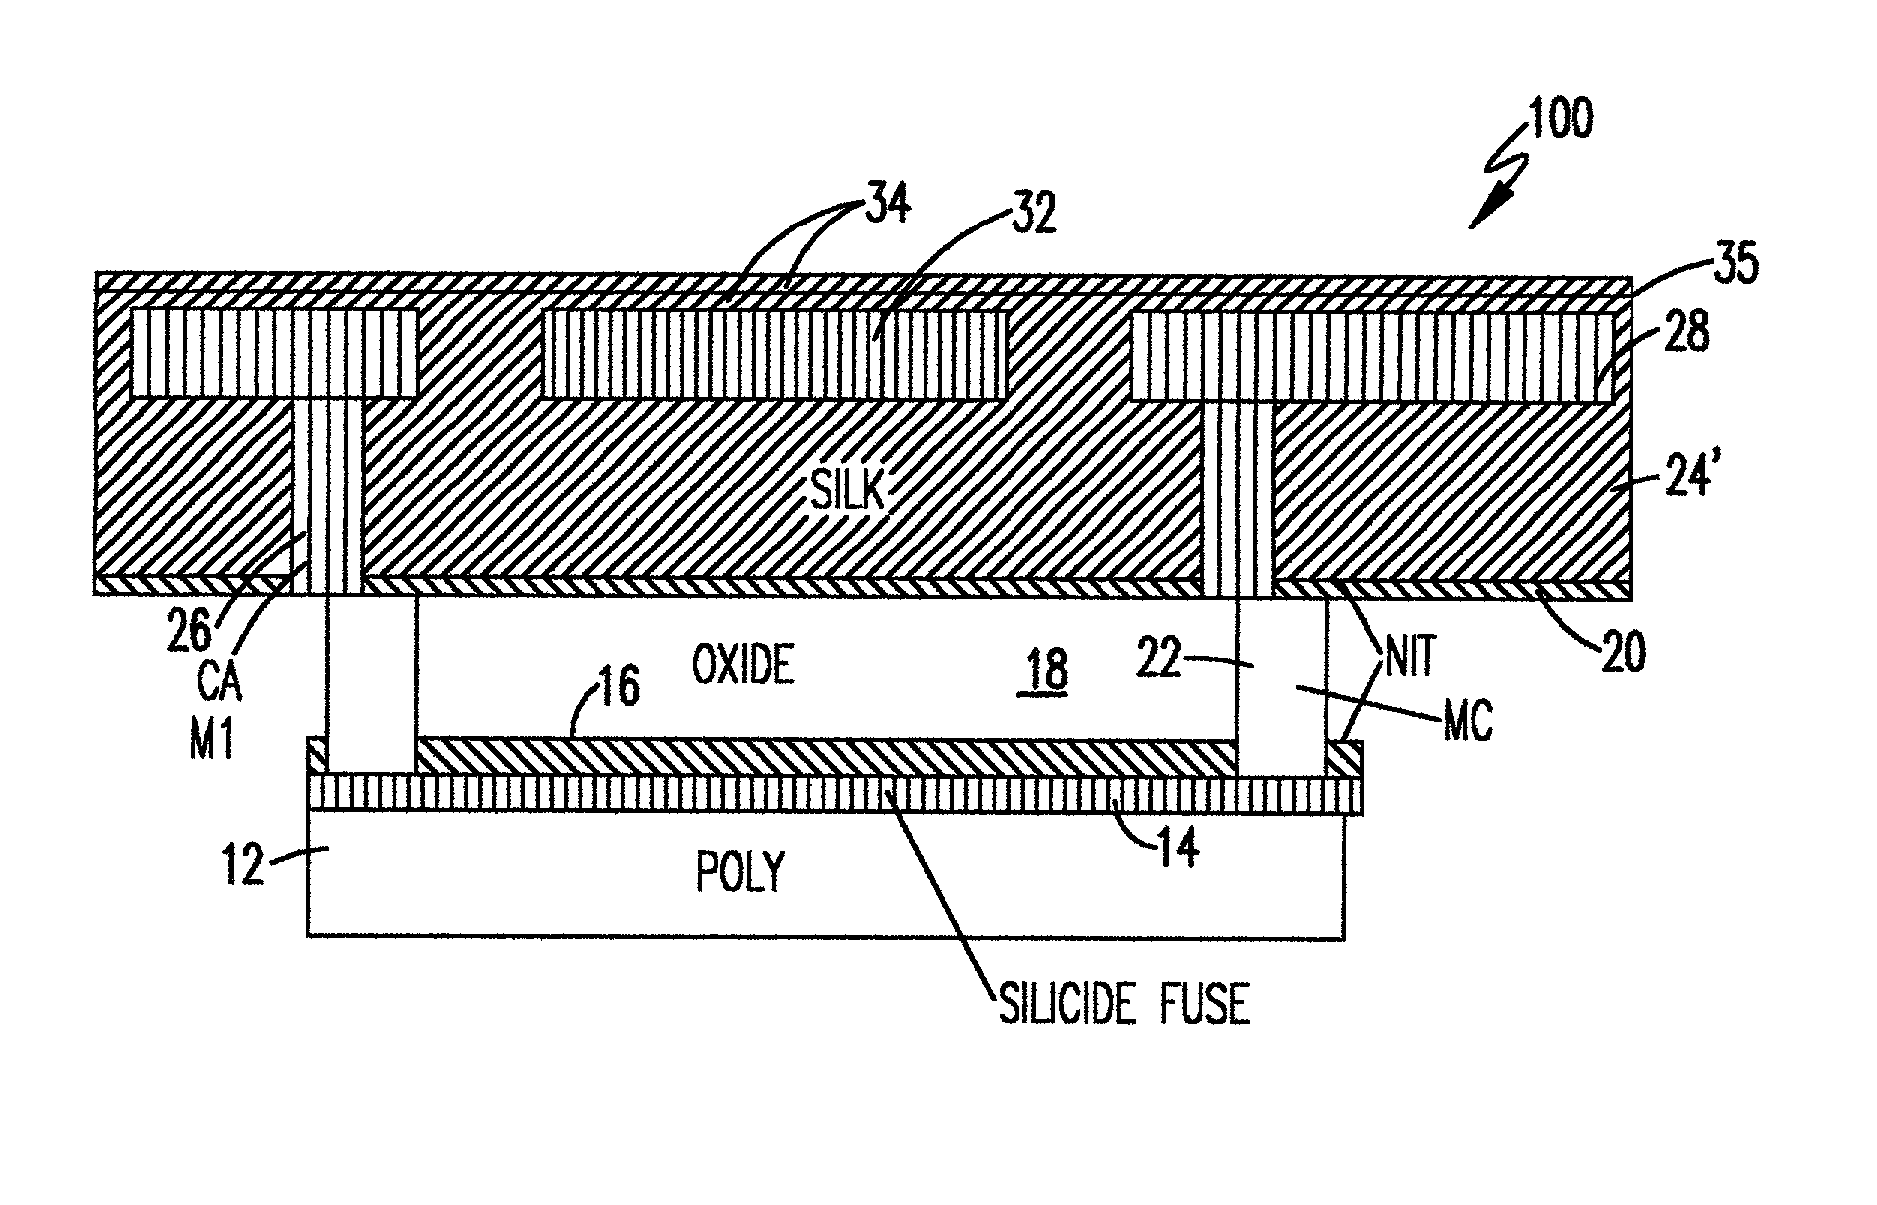 Fuse structure with thermal and crack-stop protection